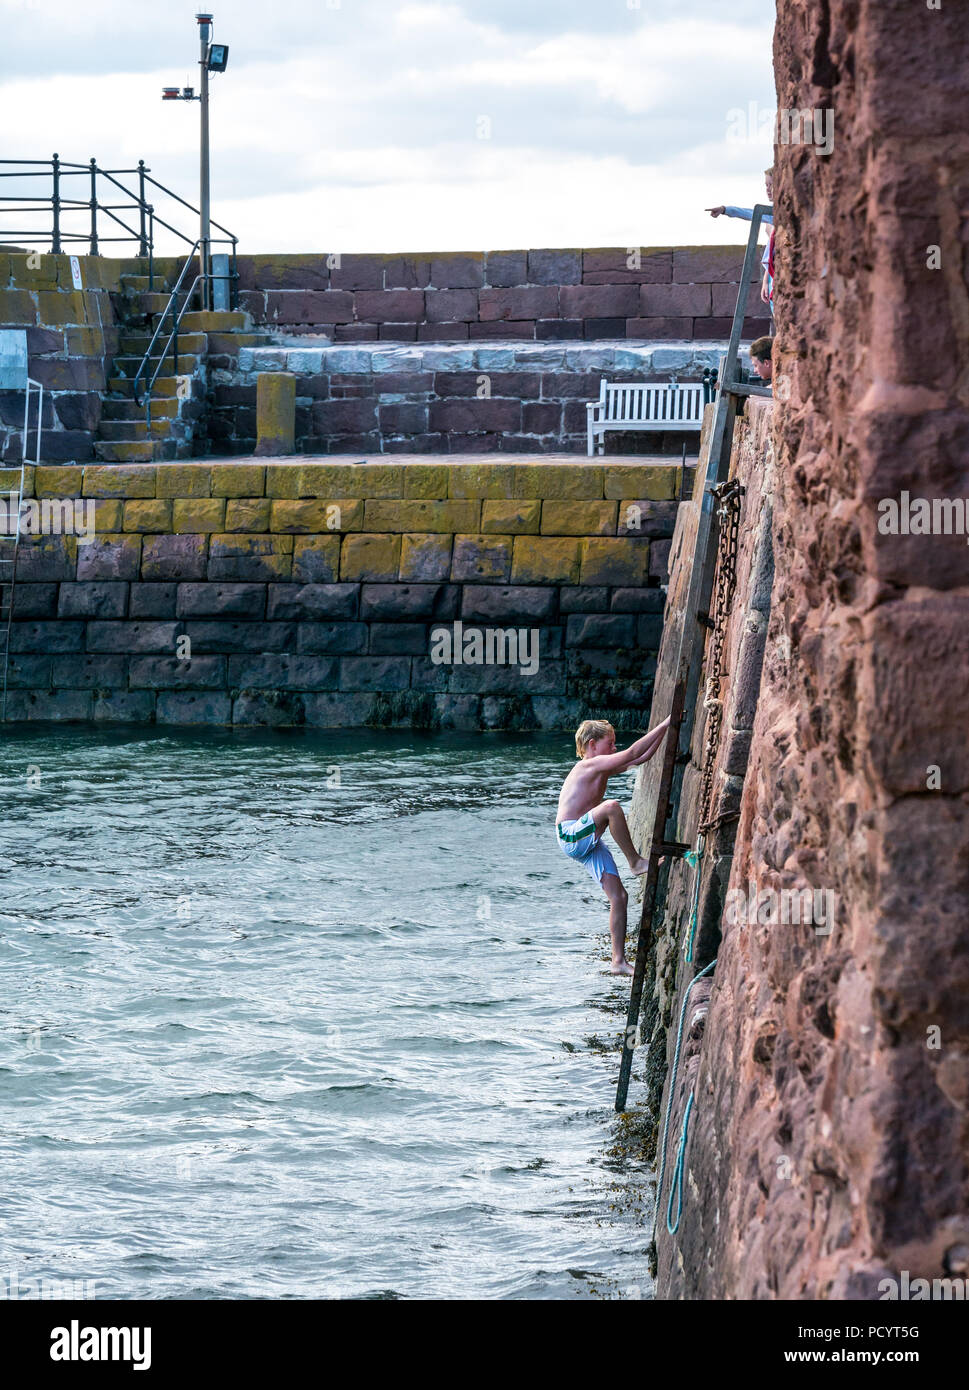 Boy climbing up harbour wall ladder after jumping off wall into water, West bay beach, North Berwick, East Lothian, Scotland, UK in Summer heatwave Stock Photo